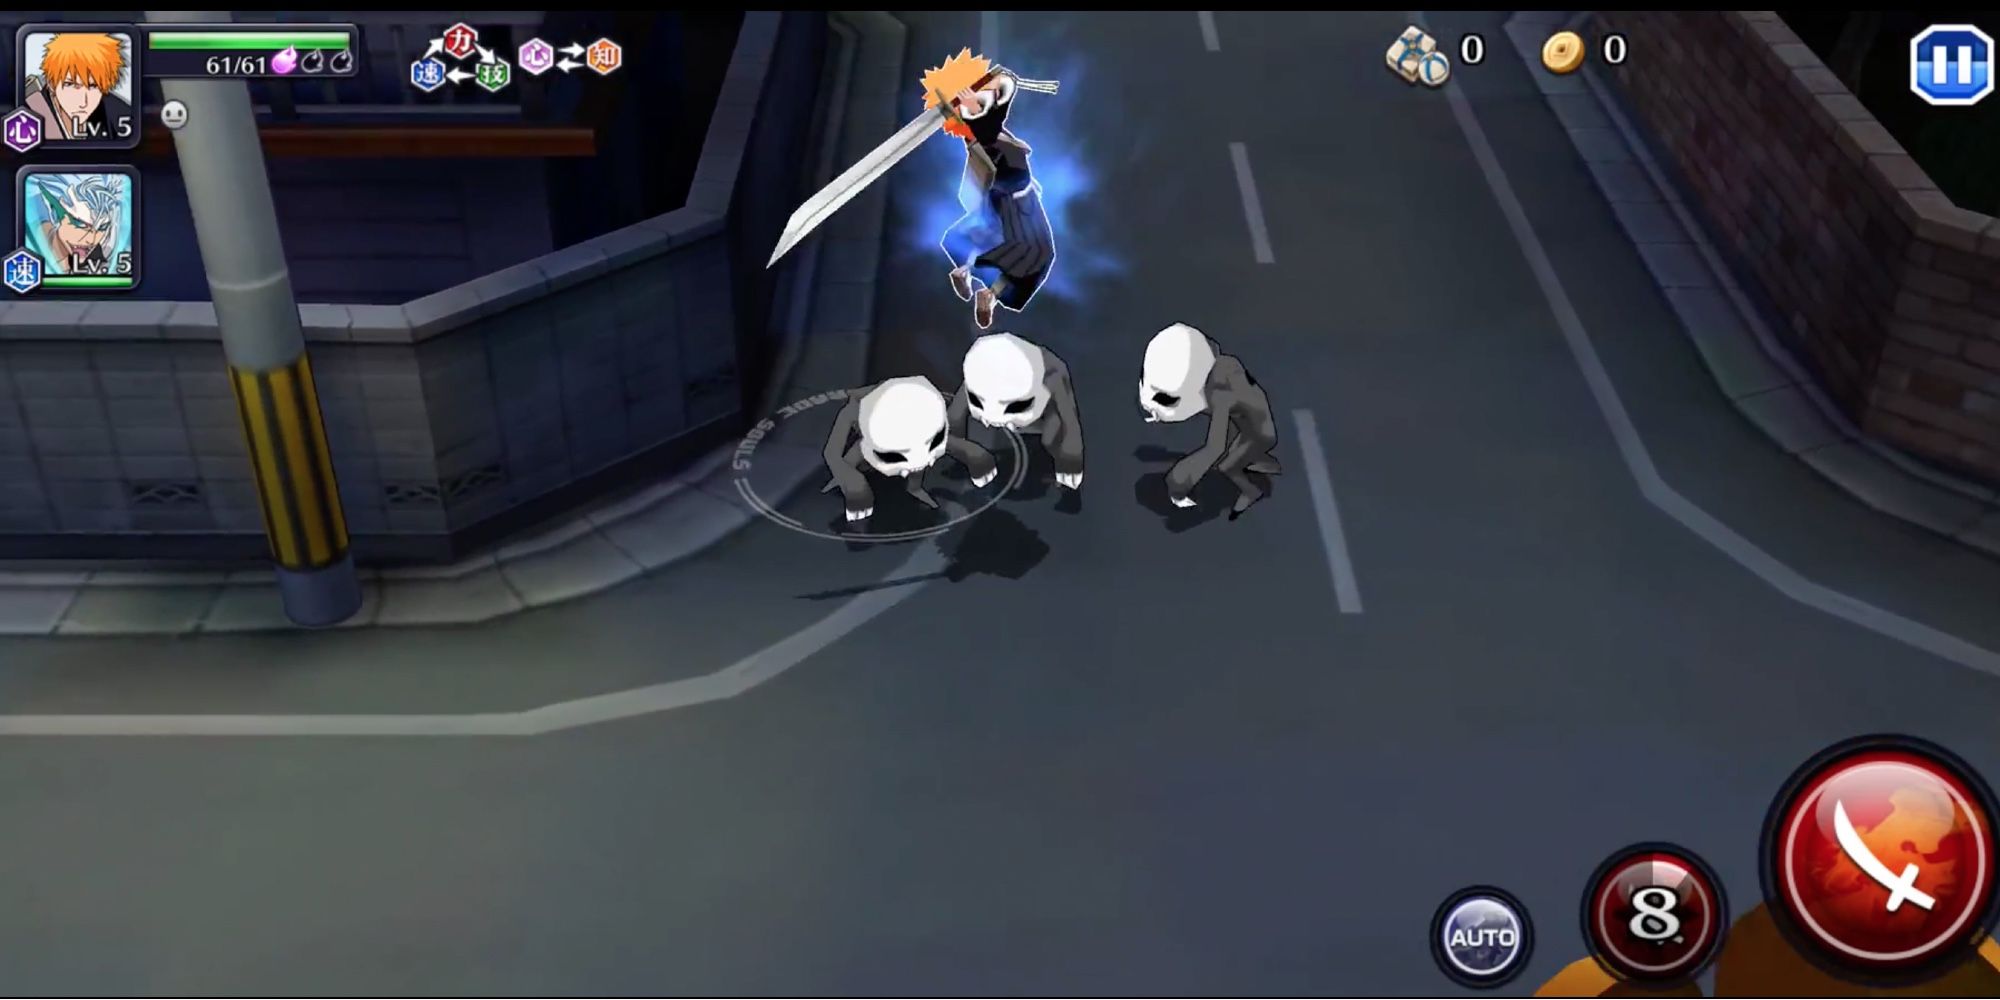 Mobile Anime Games - Player strikes enemies with sword